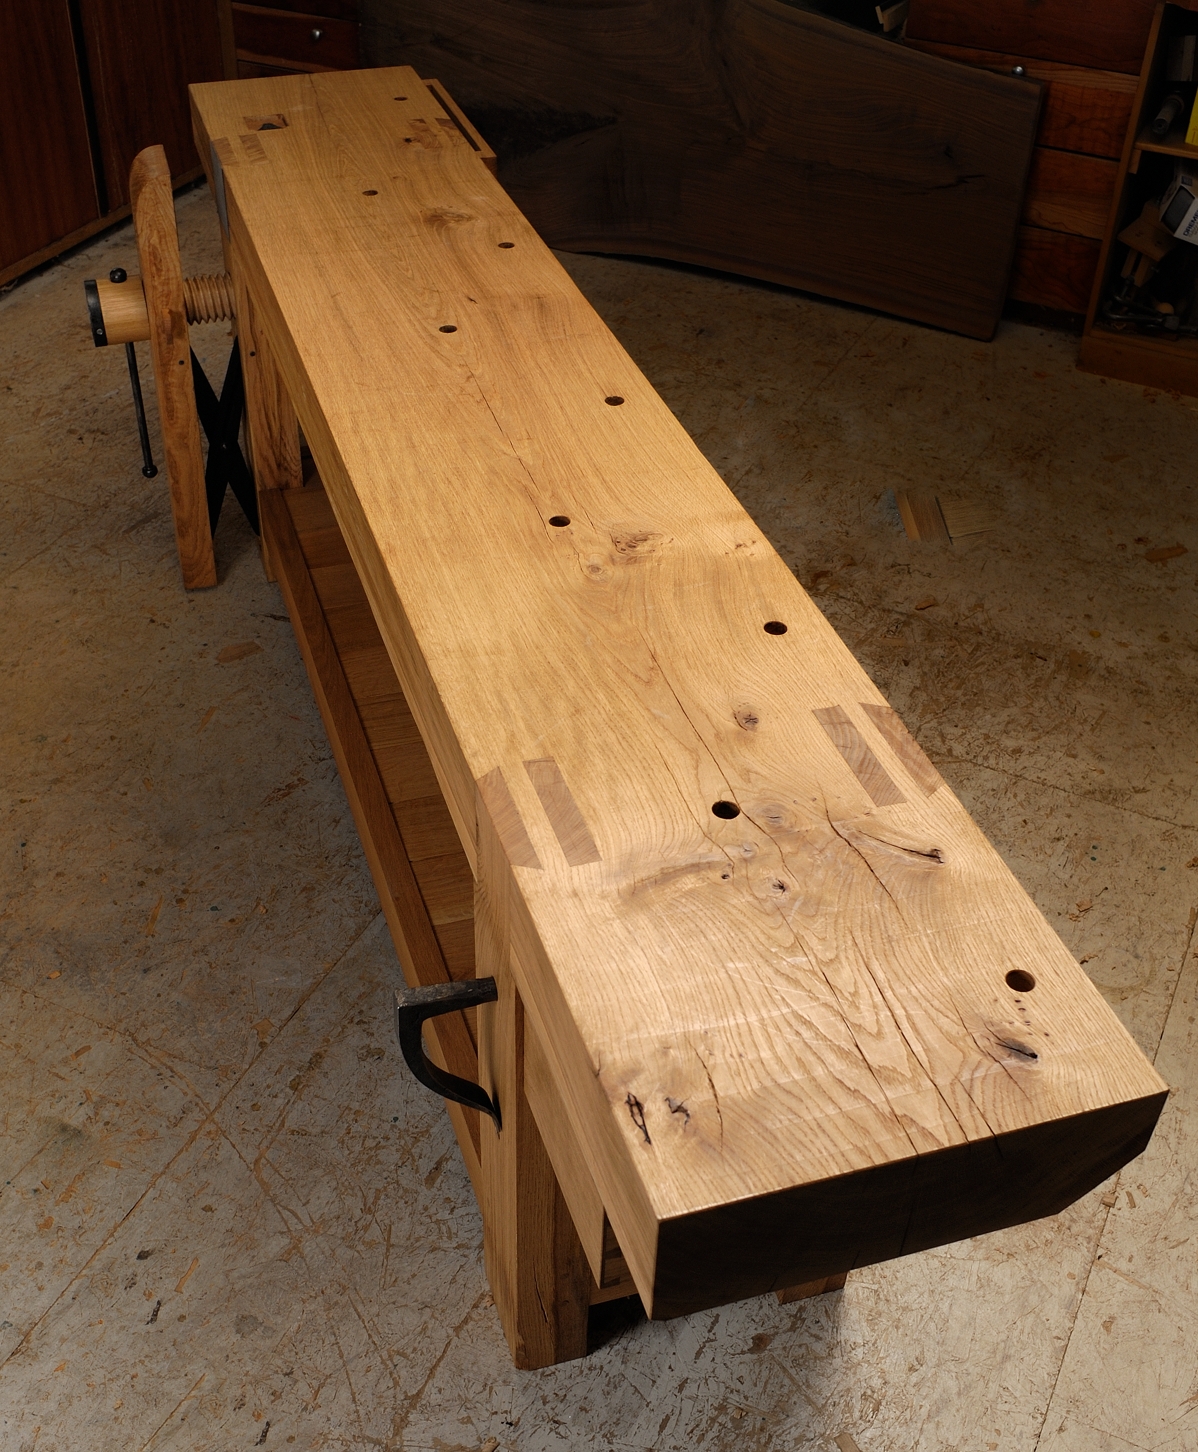 Benchcrafted: The Fre   nch Oak Plate 11 Bench: Finished